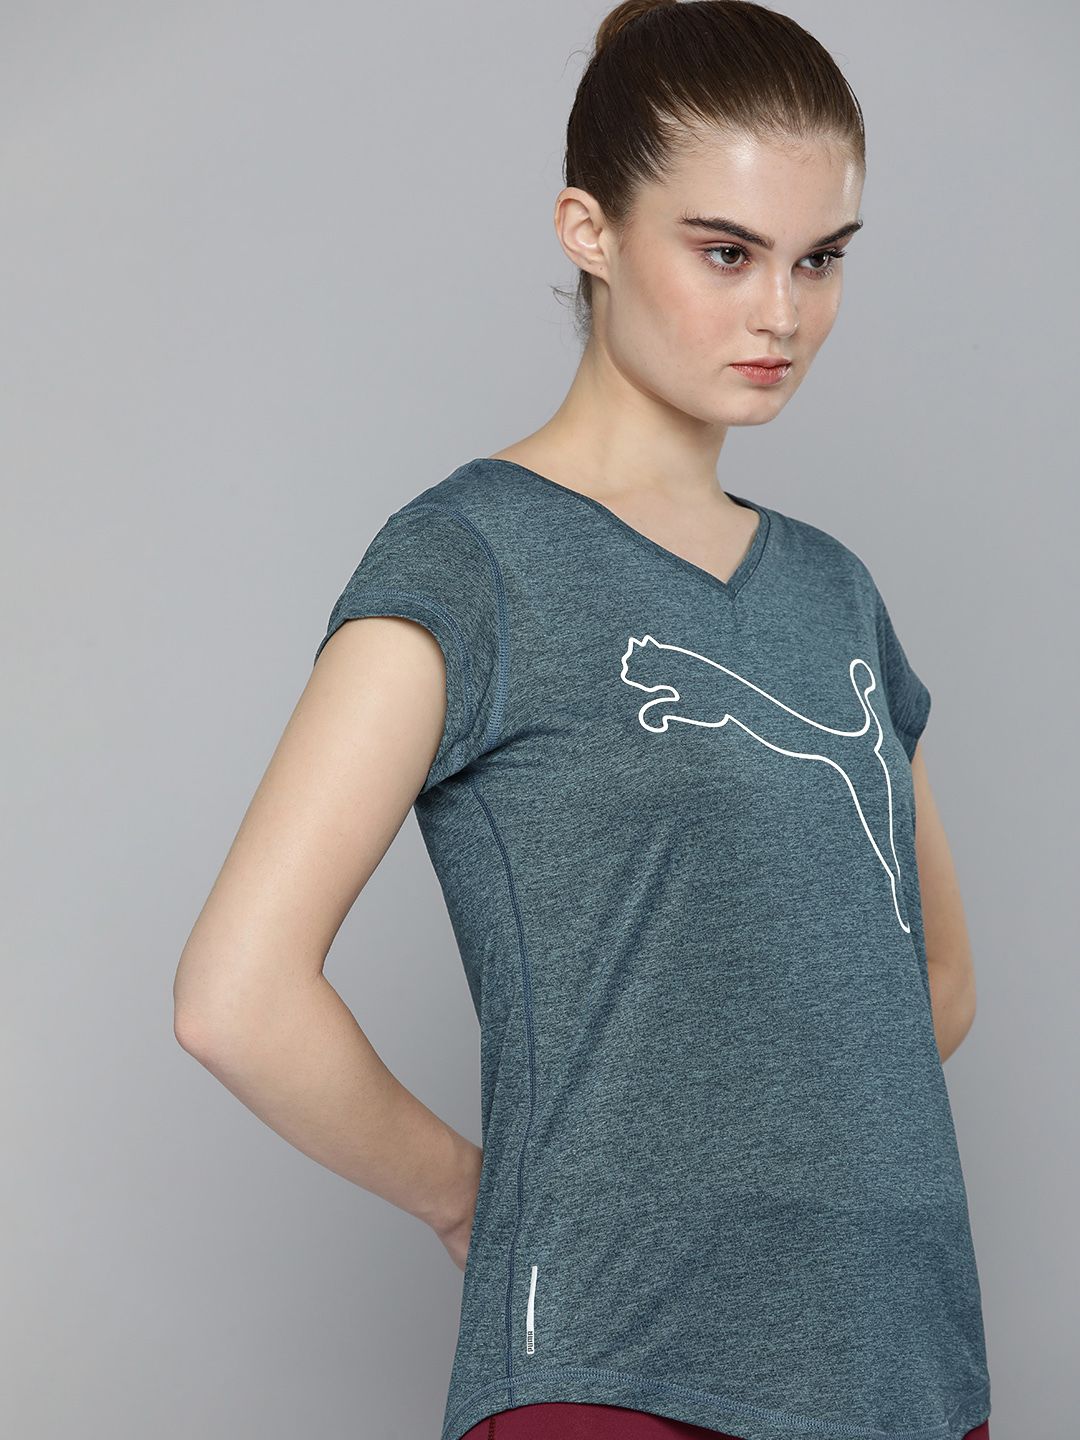 Puma Women Blue Brand Logo Printed dryCELL T-shirt Price in India